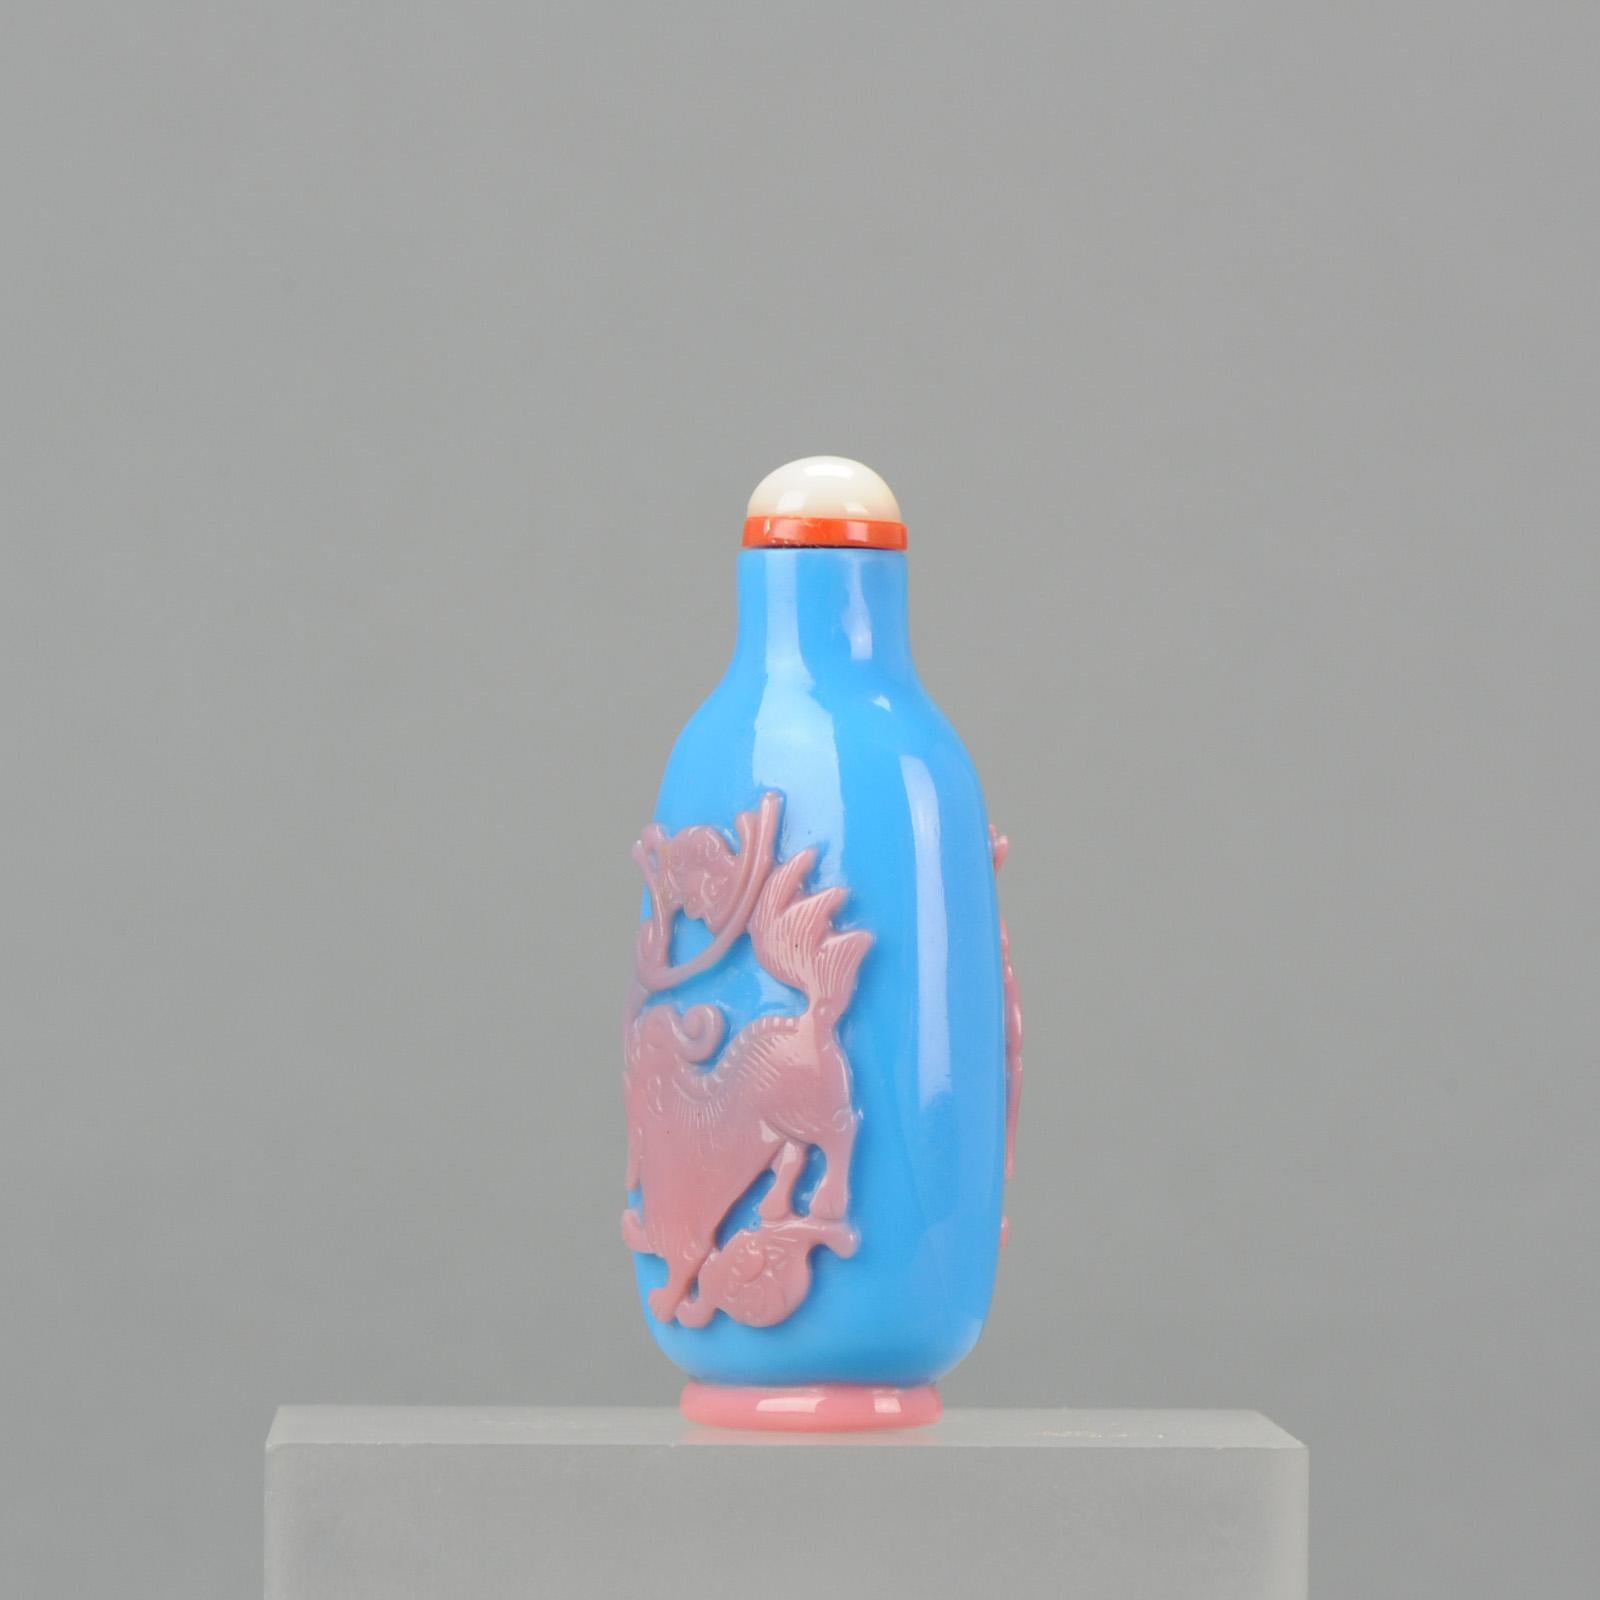 An cheerful snuff bottle with colorful decoration of foo lion

Provenance: Collection Morpurgo Amsterdam

Condition
Overall condition near perfect, a small imperfection to the pink. Size: Without stopper 63mm. With stopper 70mm

Period
Qing